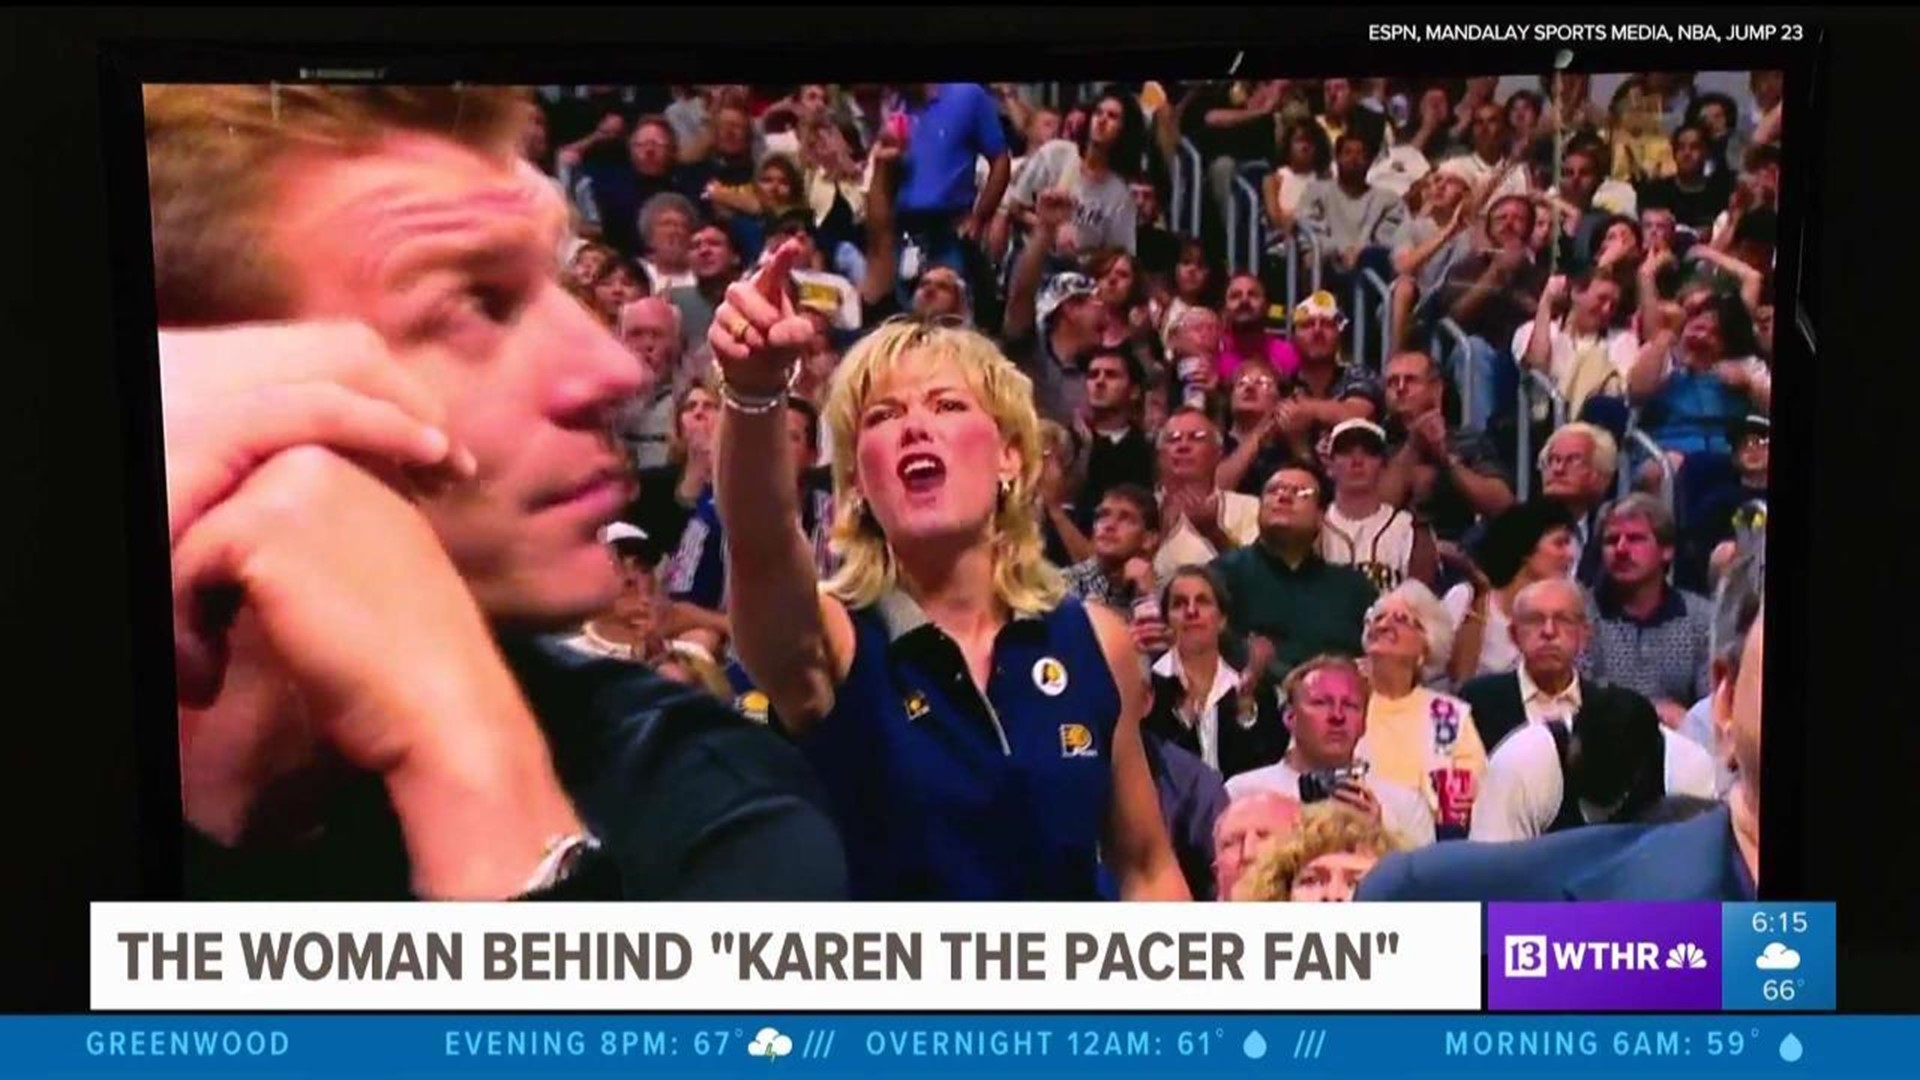 The woman behind "Karen the Pacer Fan"